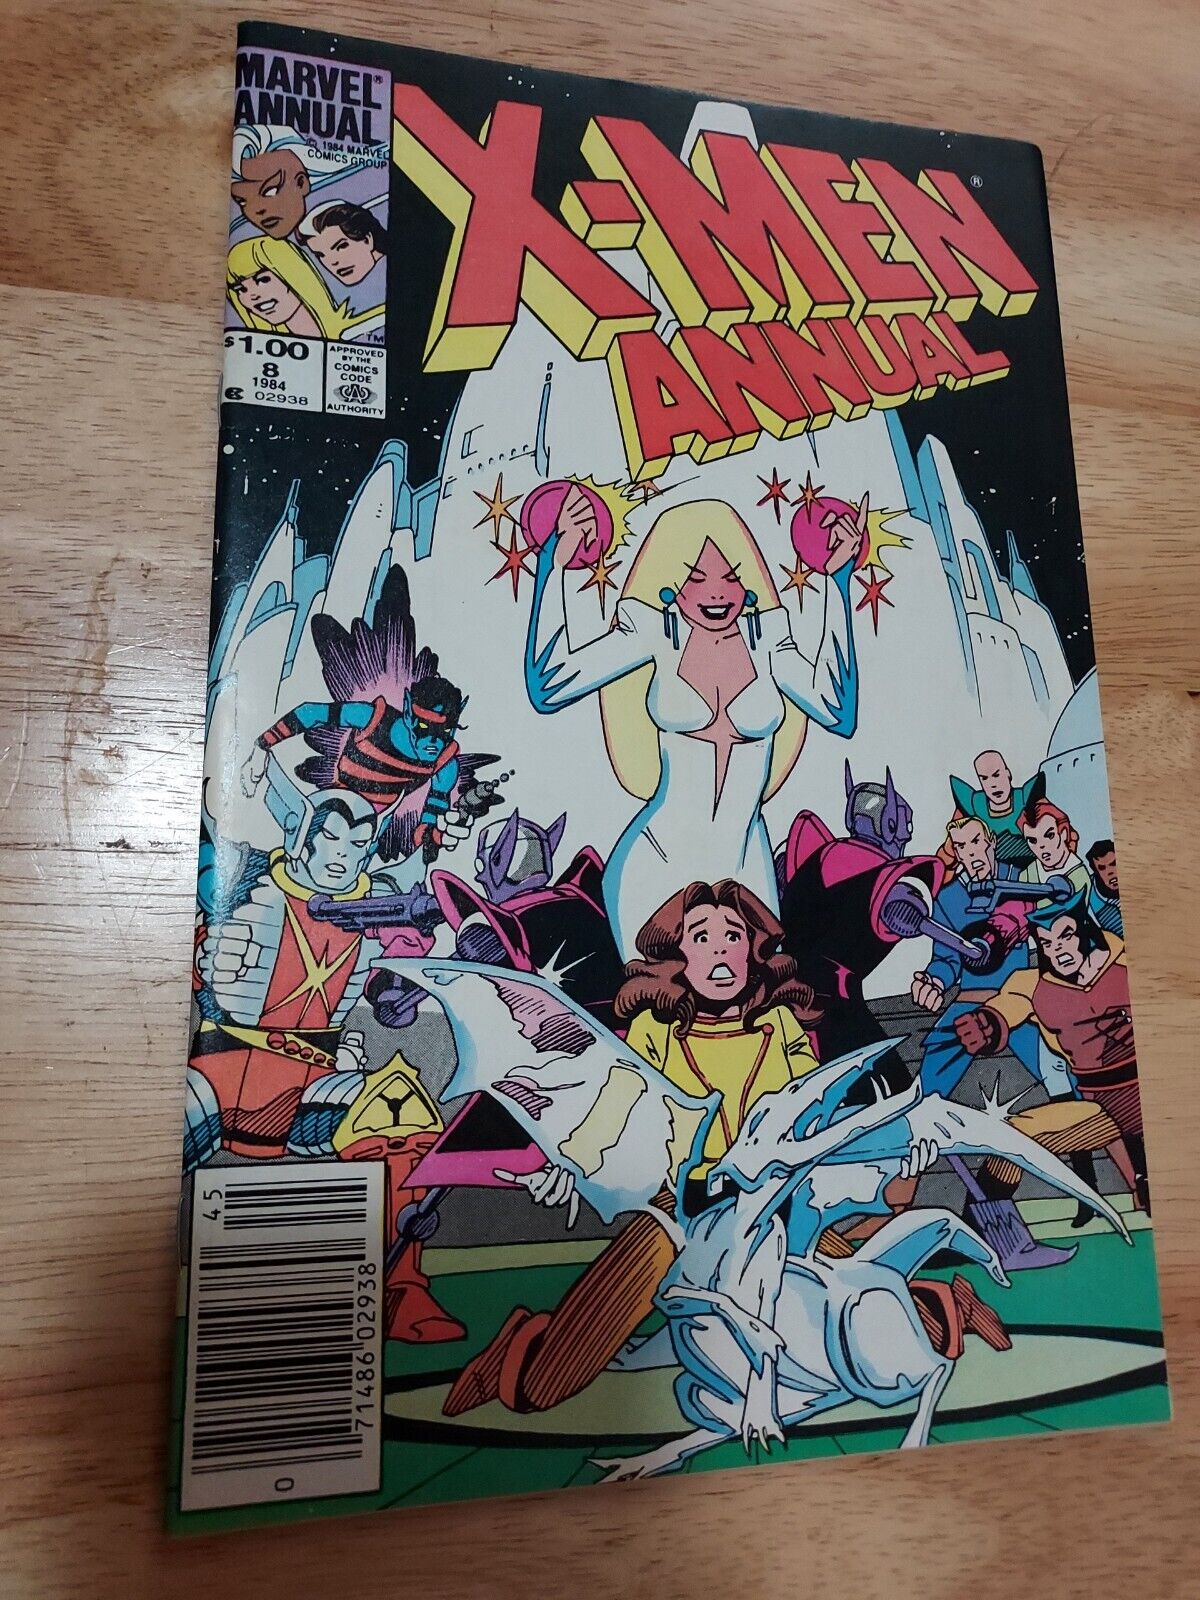  X-Men Annual #8 (1984) 9.4 NM / White Queen & Kitty Pryde with Dragon Cover!